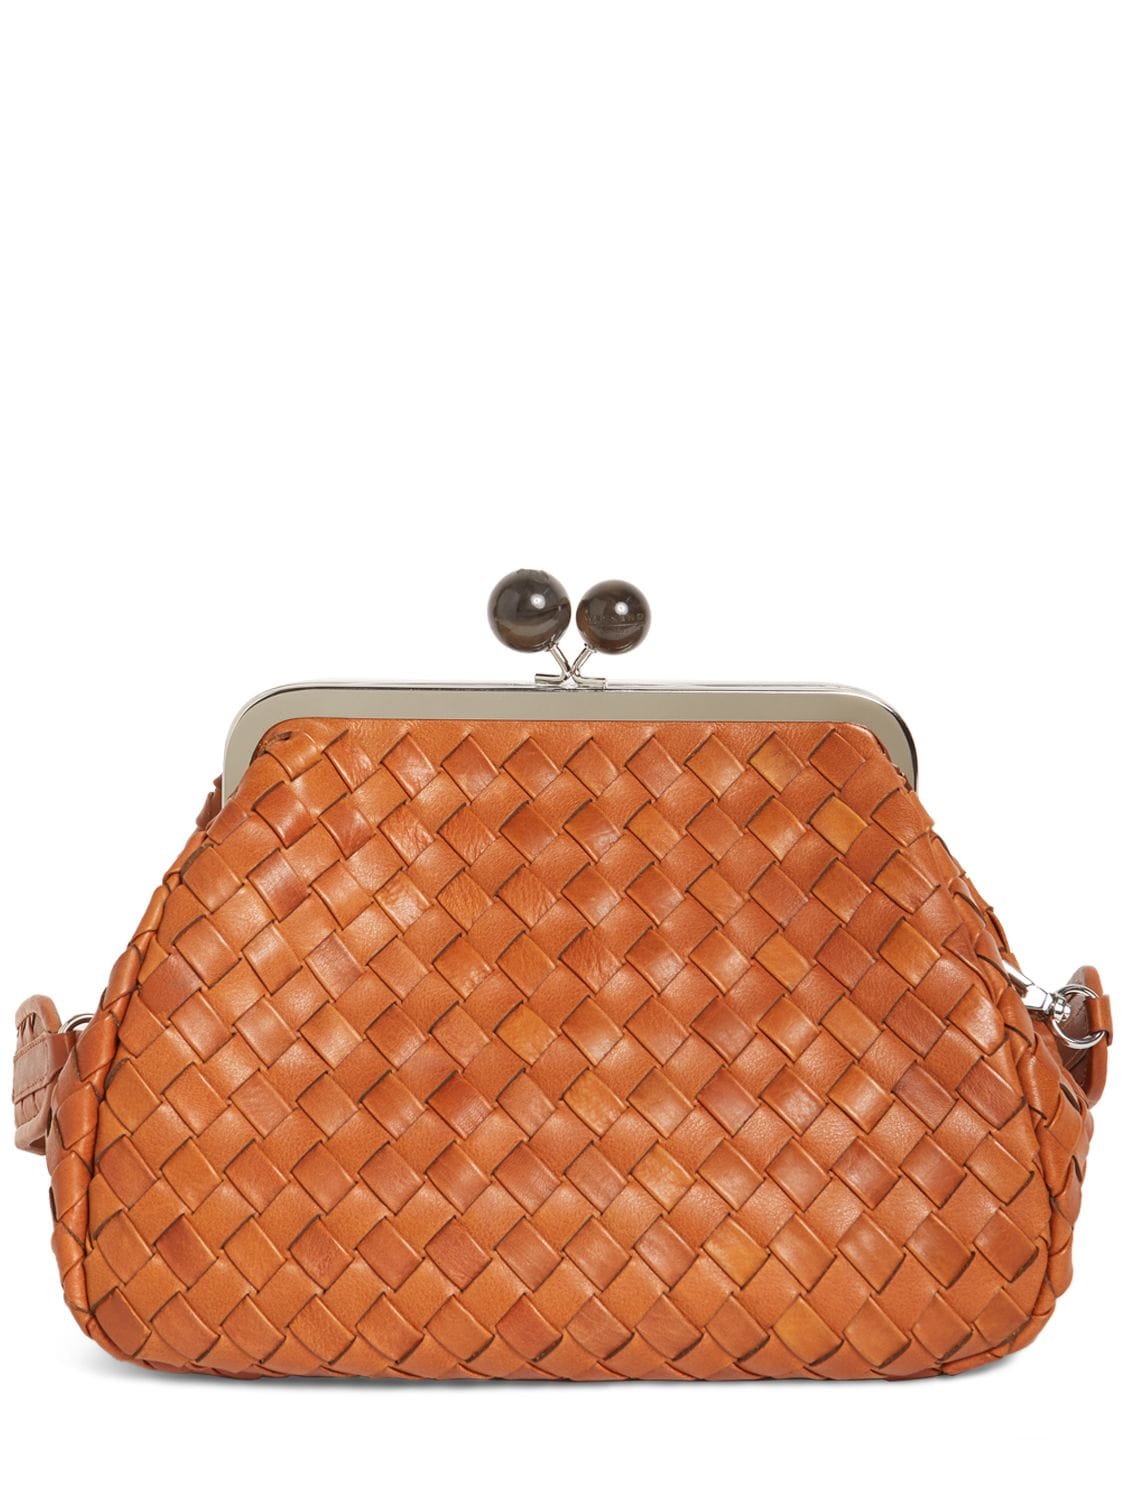 Weekend Max Mara Pancia Woven Leather Clutch In Brown